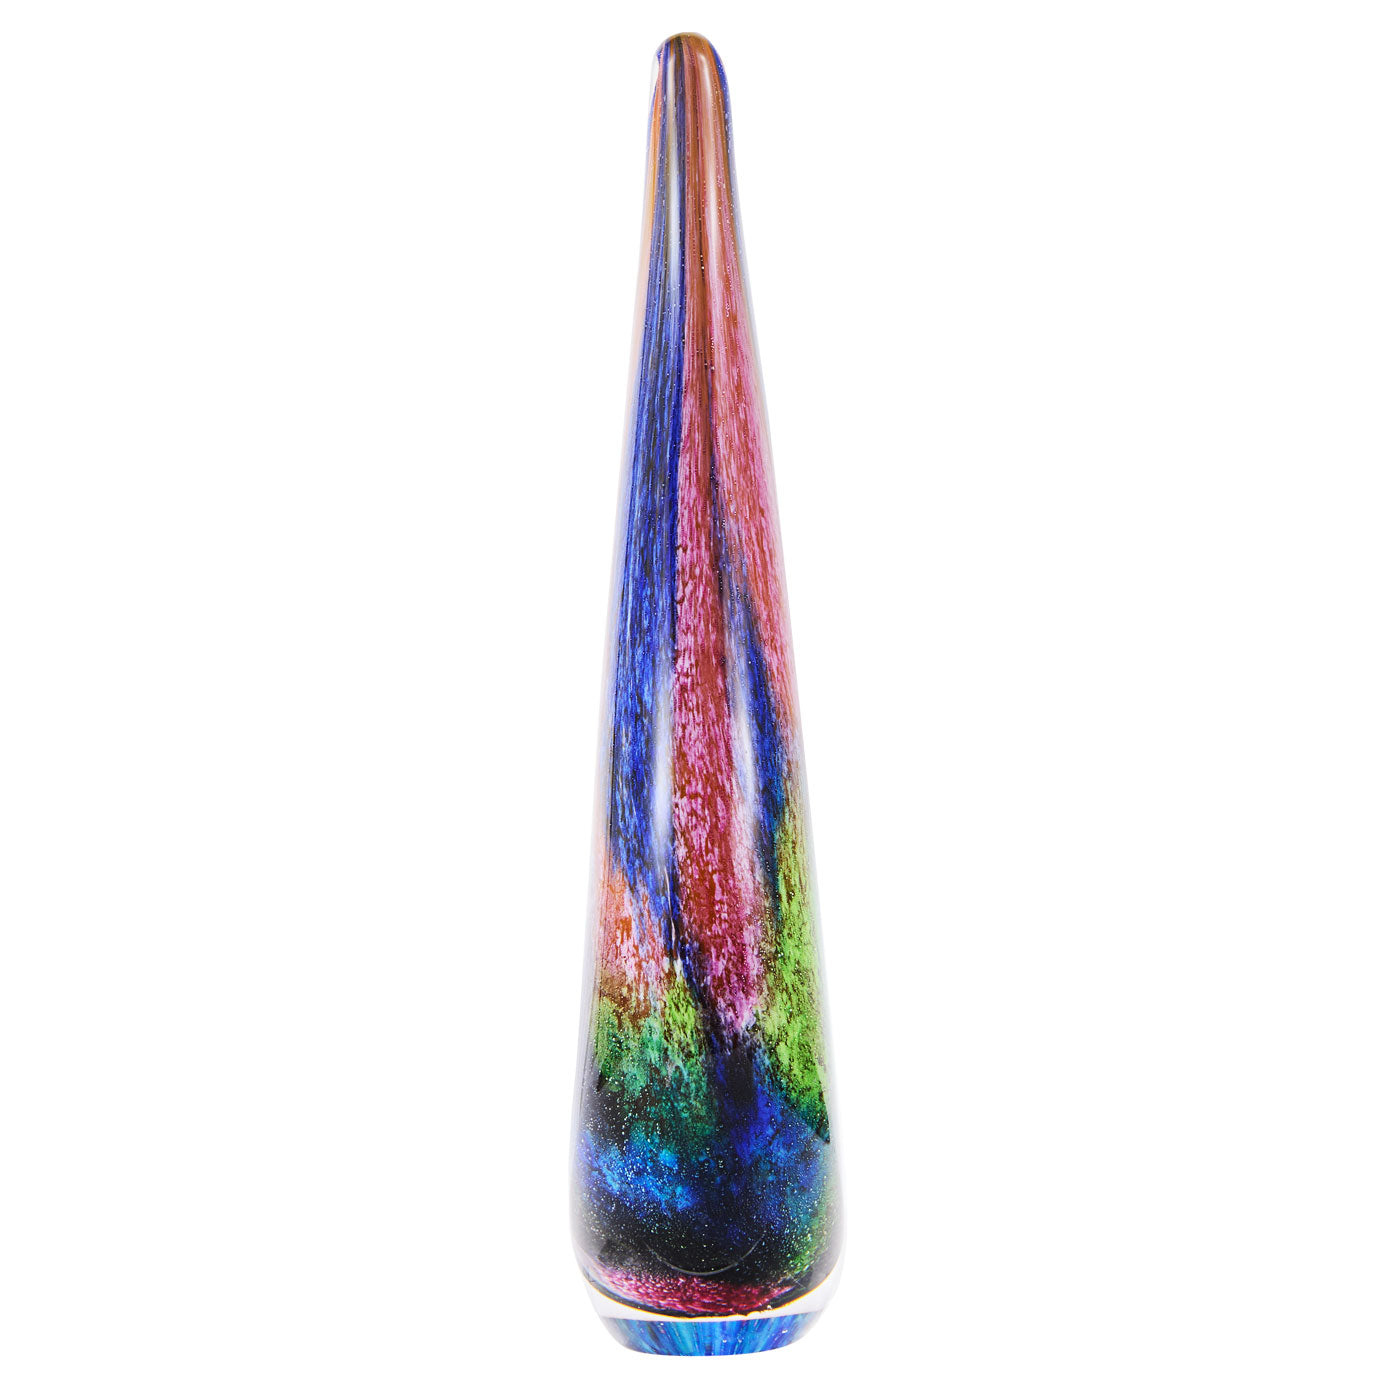 Luxury Lane Hand Blown Abstract Hollow Tear Drop Sommerso Art Glass Sculpture 8.5 inch tall